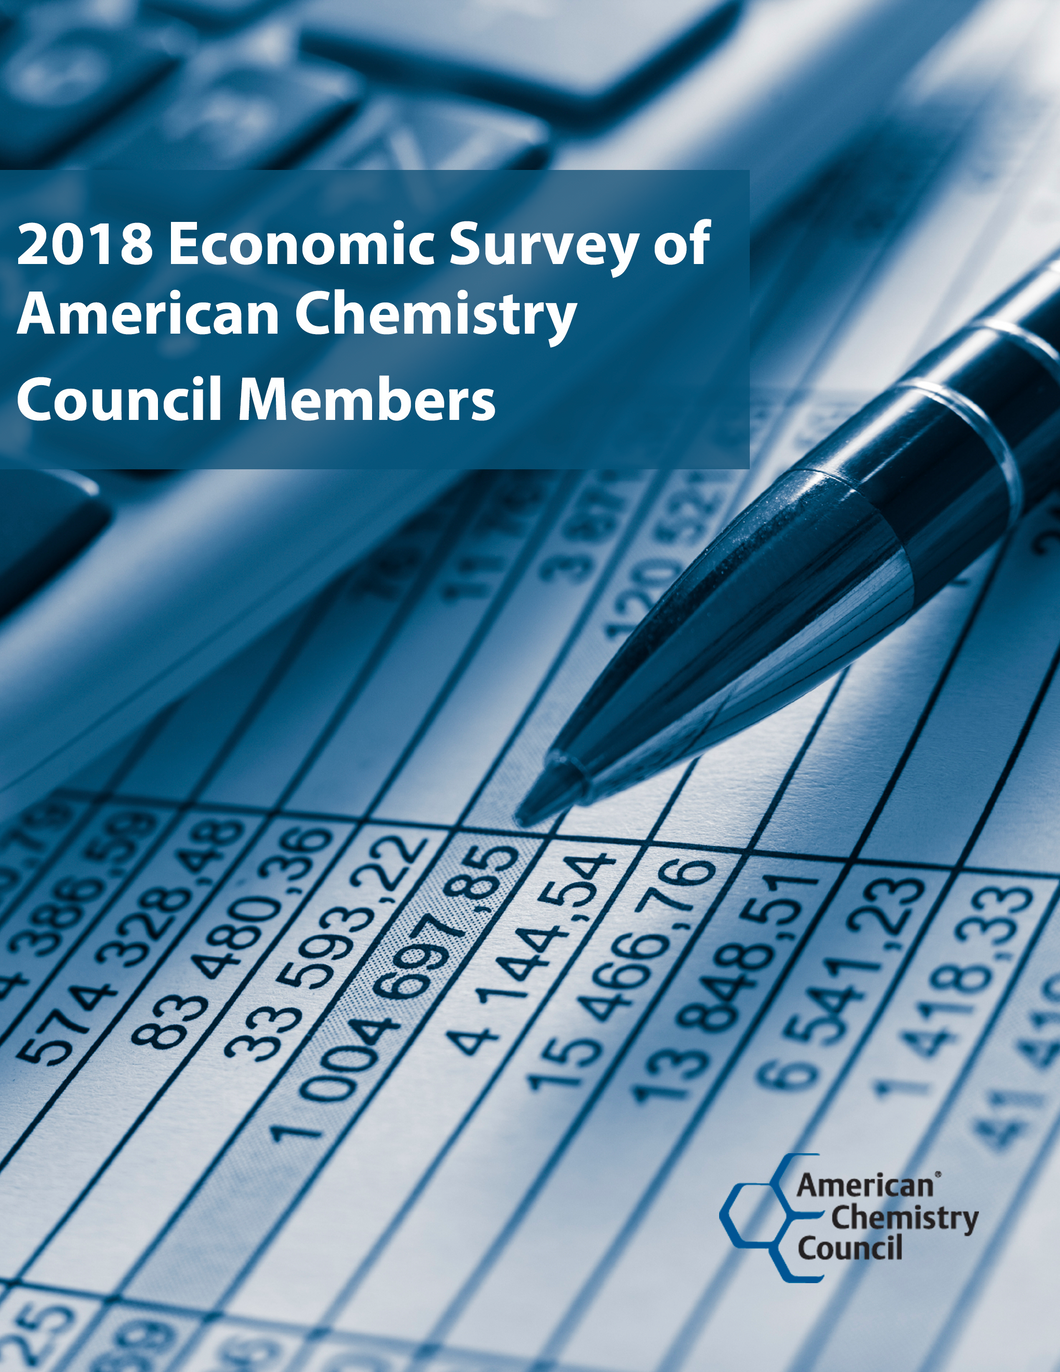 Economic Survey of American Chemistry Council Members - 2018